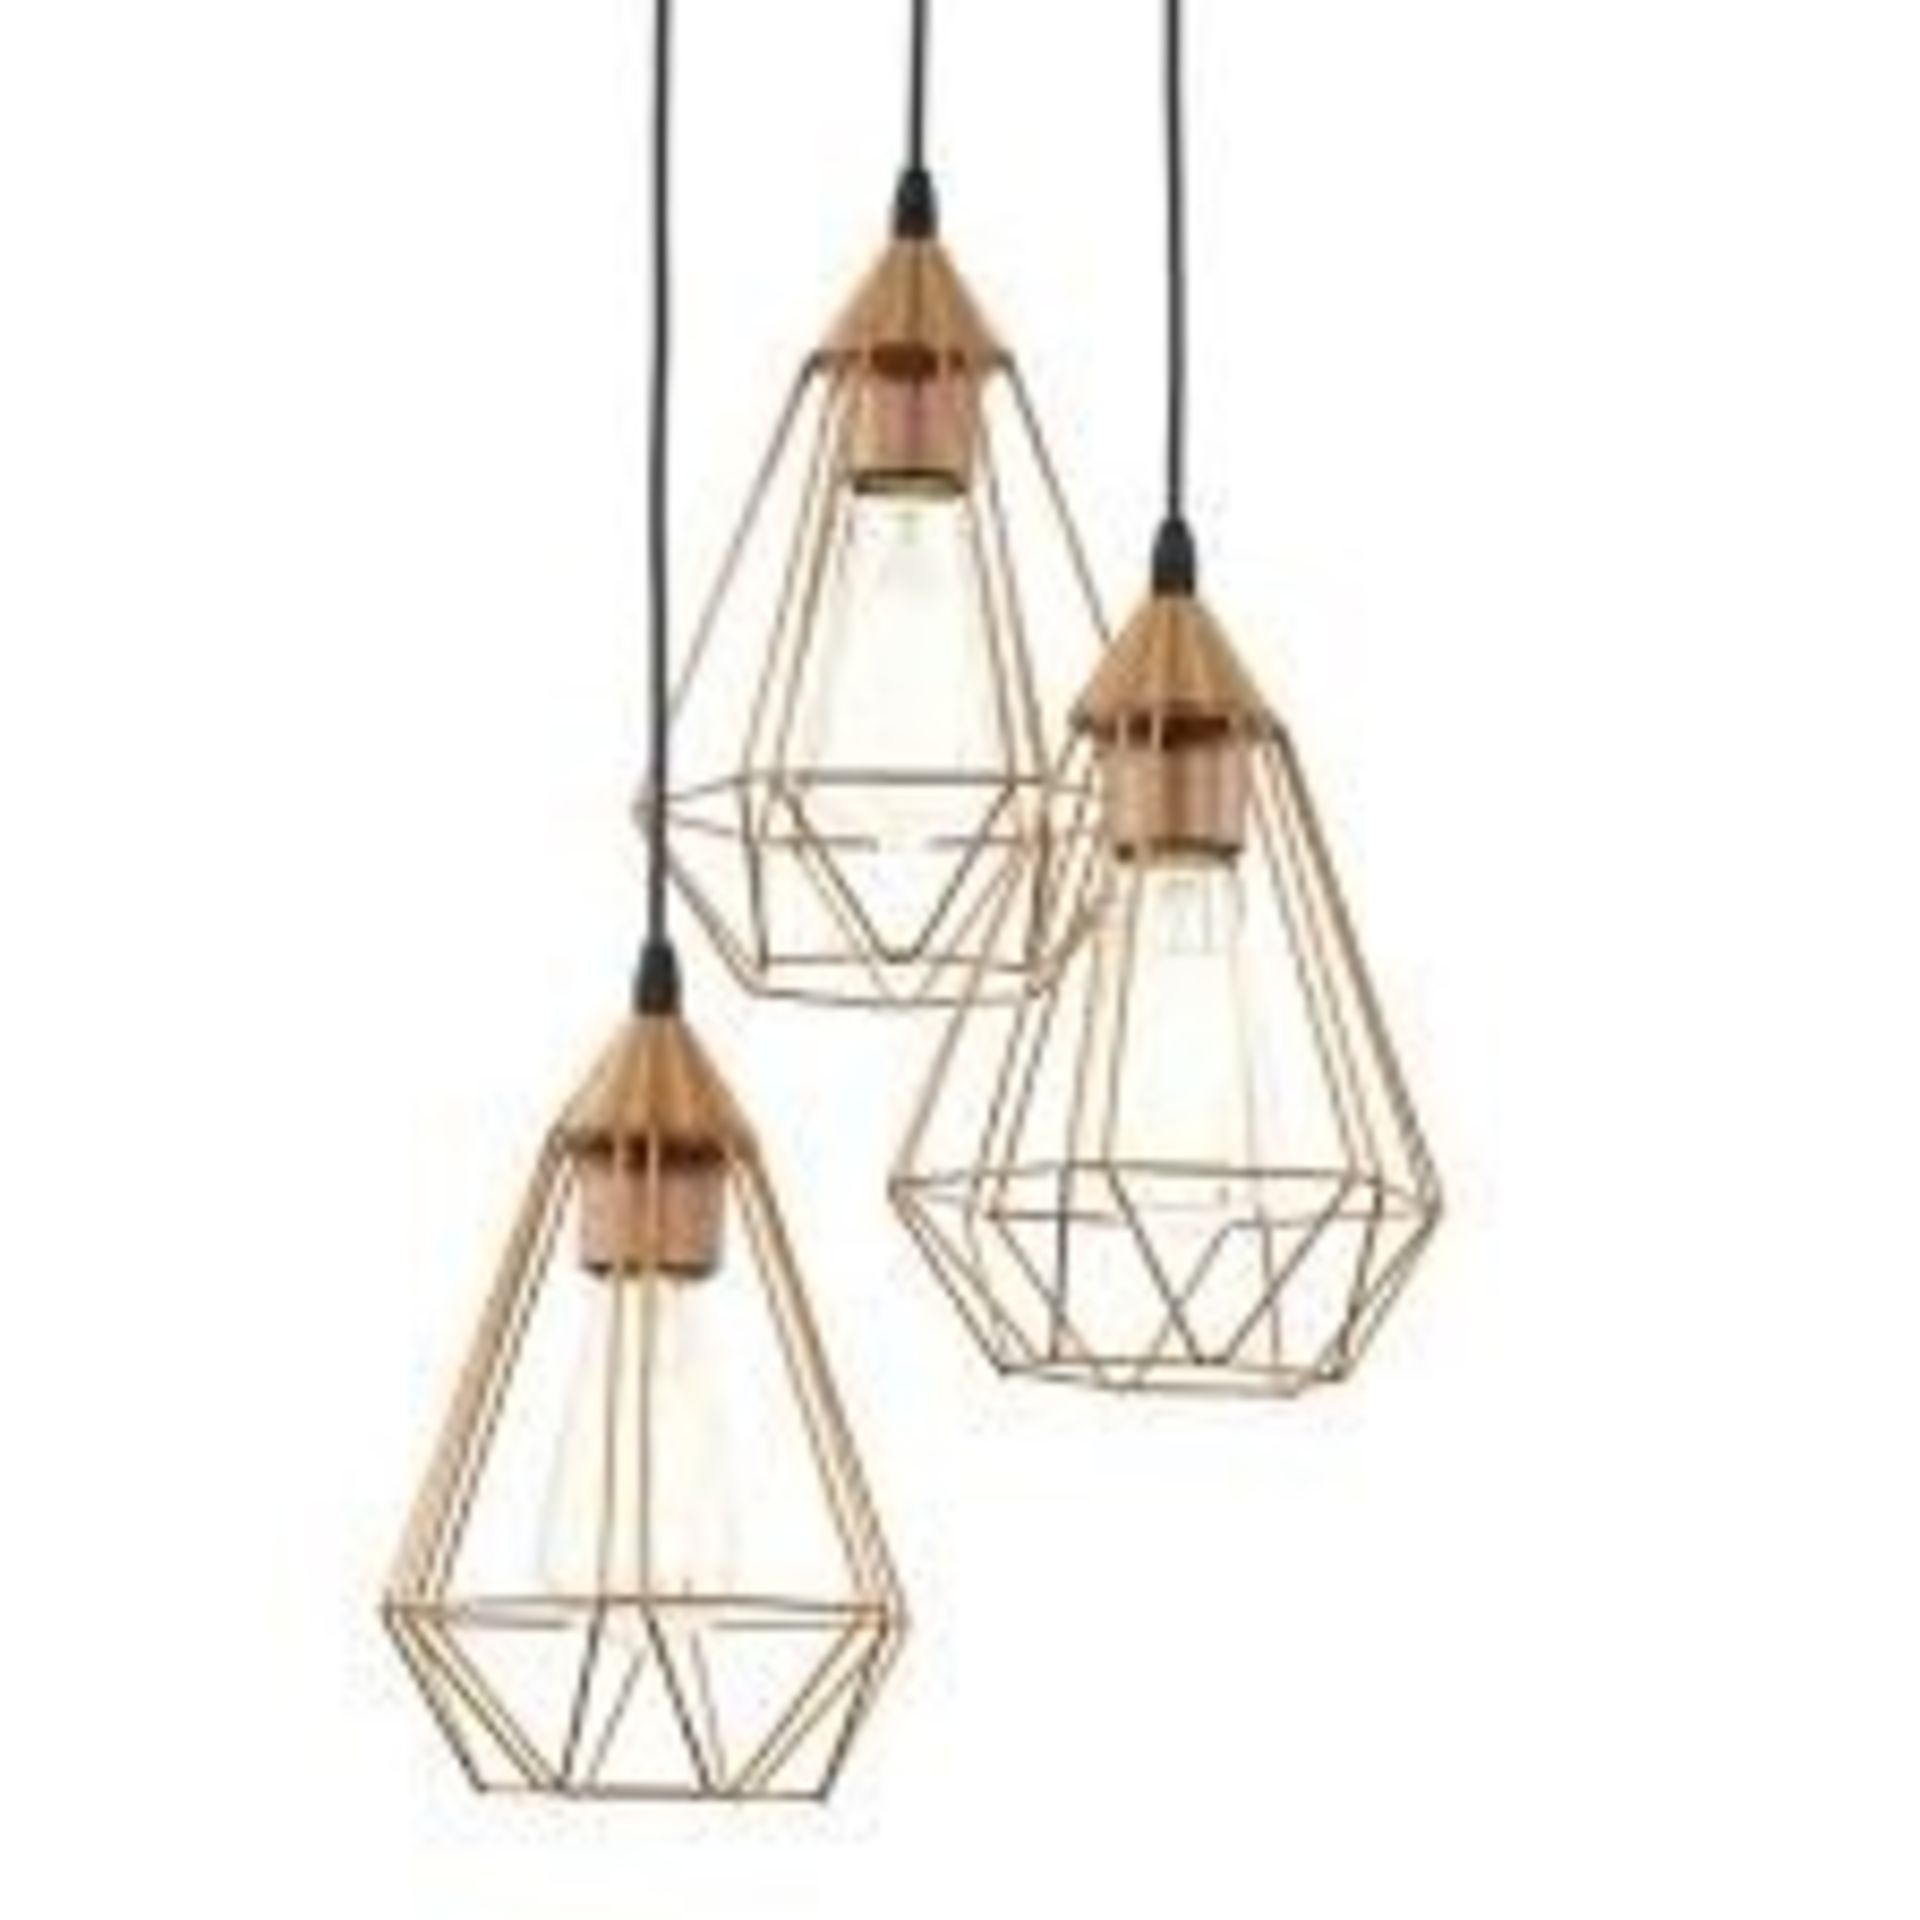 Lot to Contain 2 Boxed Eglo Triple Bar Geometric Lights (10474)(EGF4804) Combined RRP £110